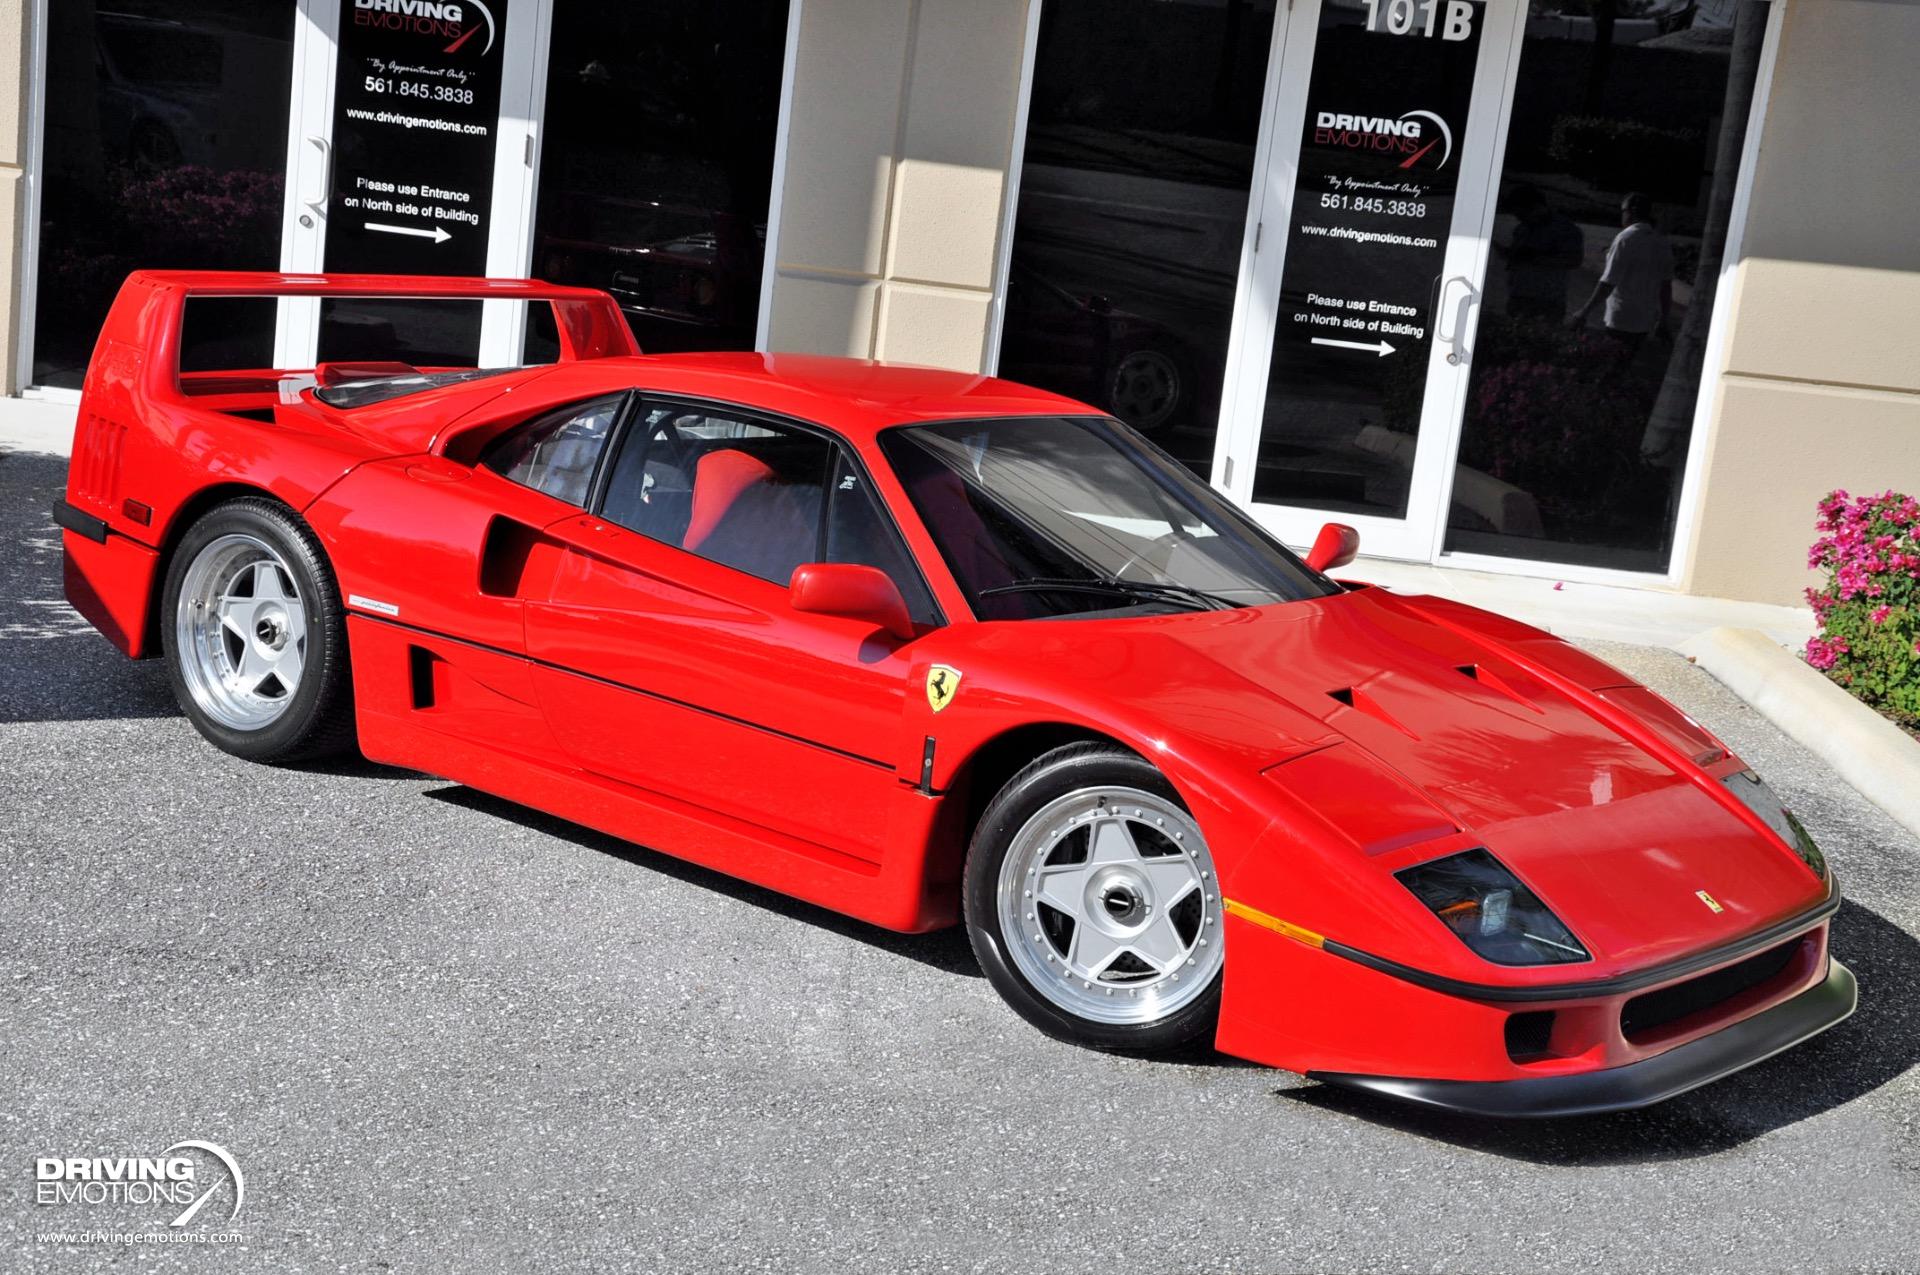 Like New Ferrari F40 Has 193 Miles On The Clock And A Huge Desire To Be Driven Carscoops